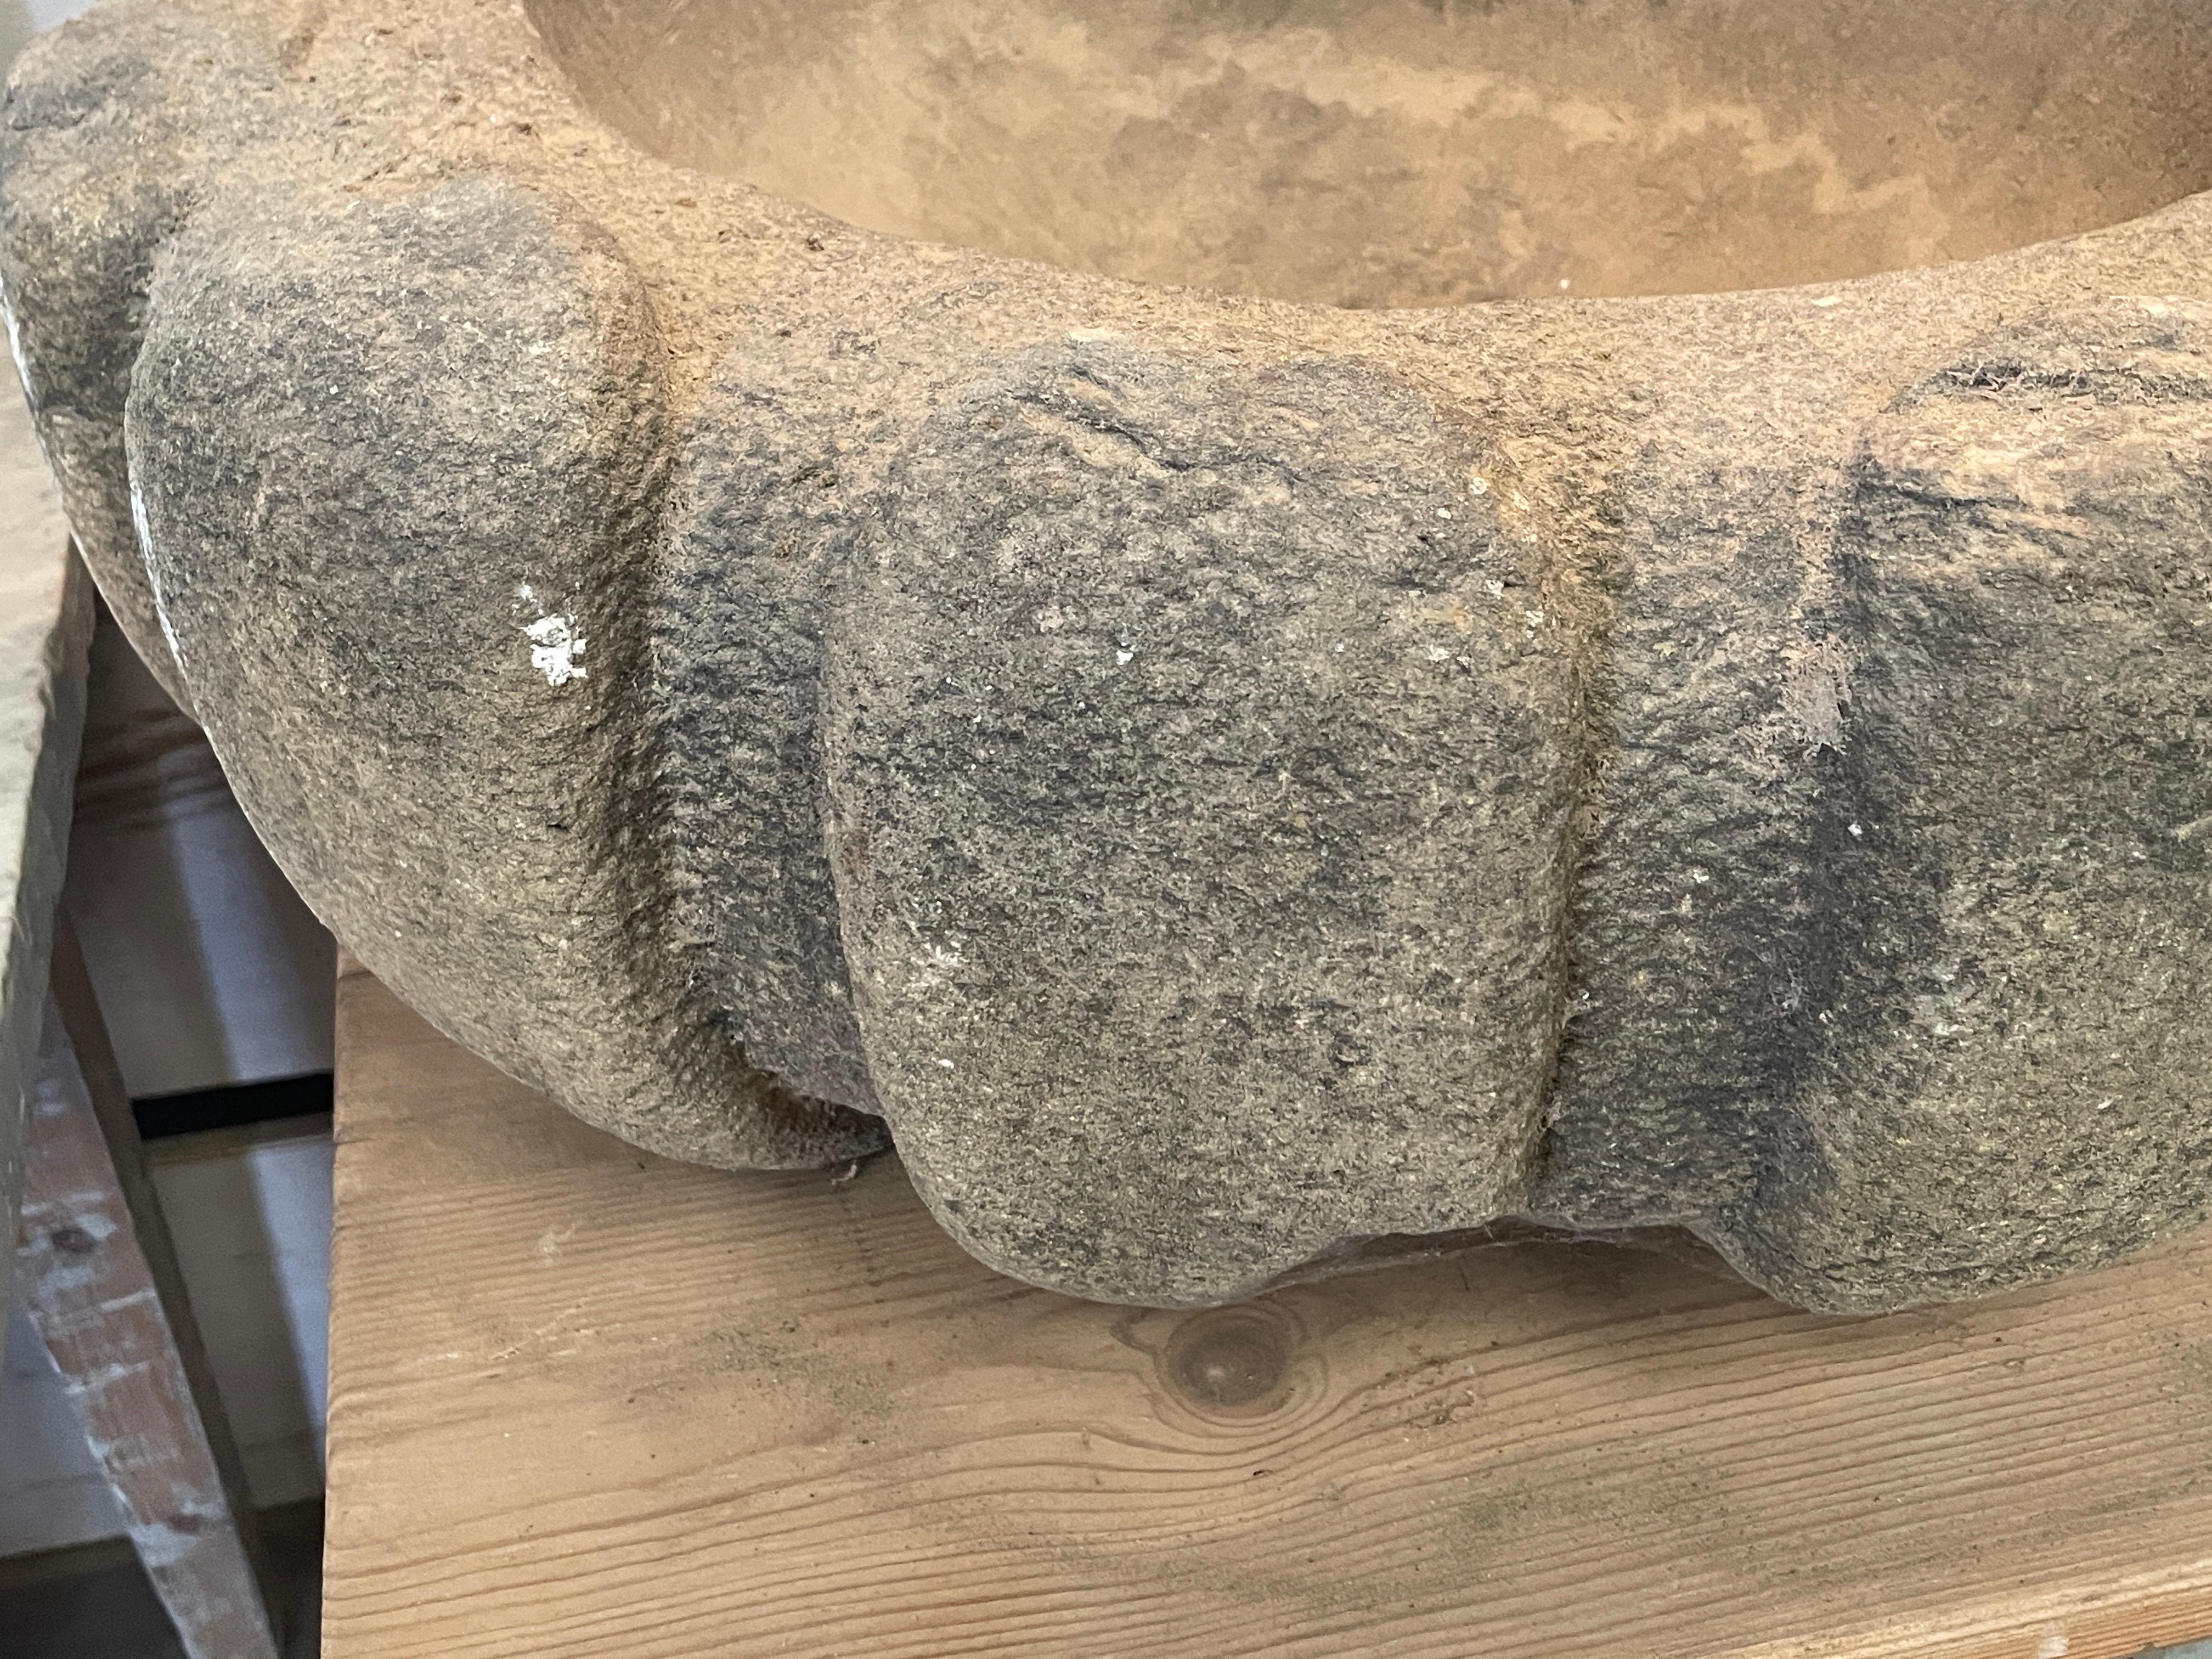 This rare pair of granite stone planters were found in a Villa in Tuscany.
They are very heavy and great on top of a substantial pedestal to hold their weight. They would also be amazing with a grouping of orchids indoors.
24” diameter x 8.5 t